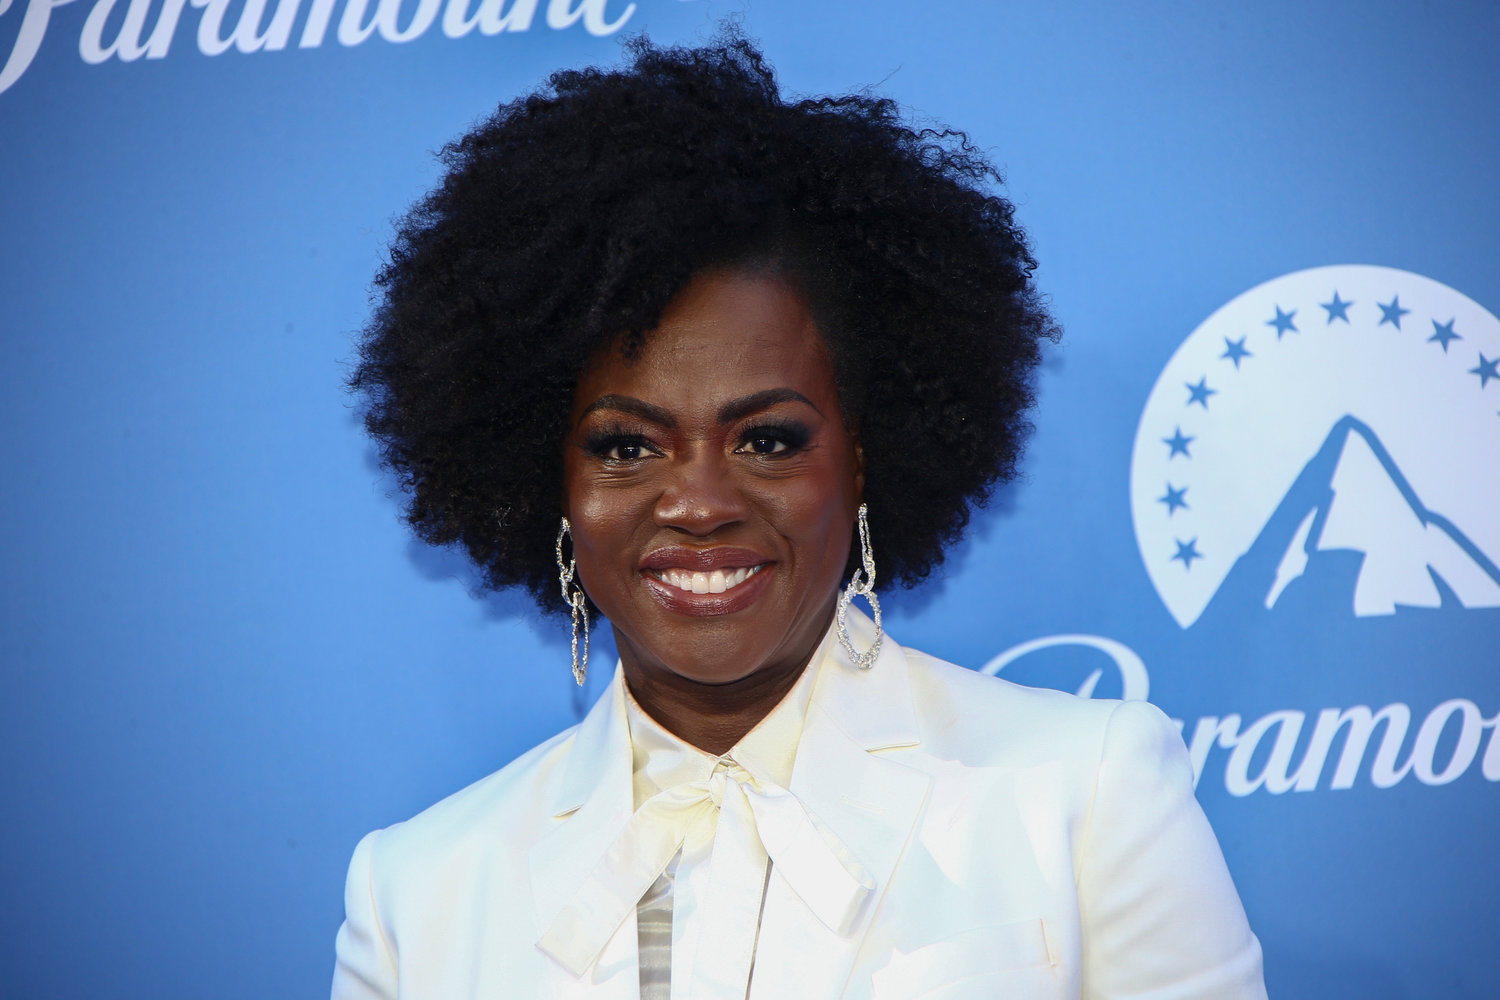 Viola Davis poses for photographers upon arrival at the UK launch of the streaming site Paramount +, in London, Monday, June 20, 2022. (Photo by Joel C Ryan/Invision/AP)